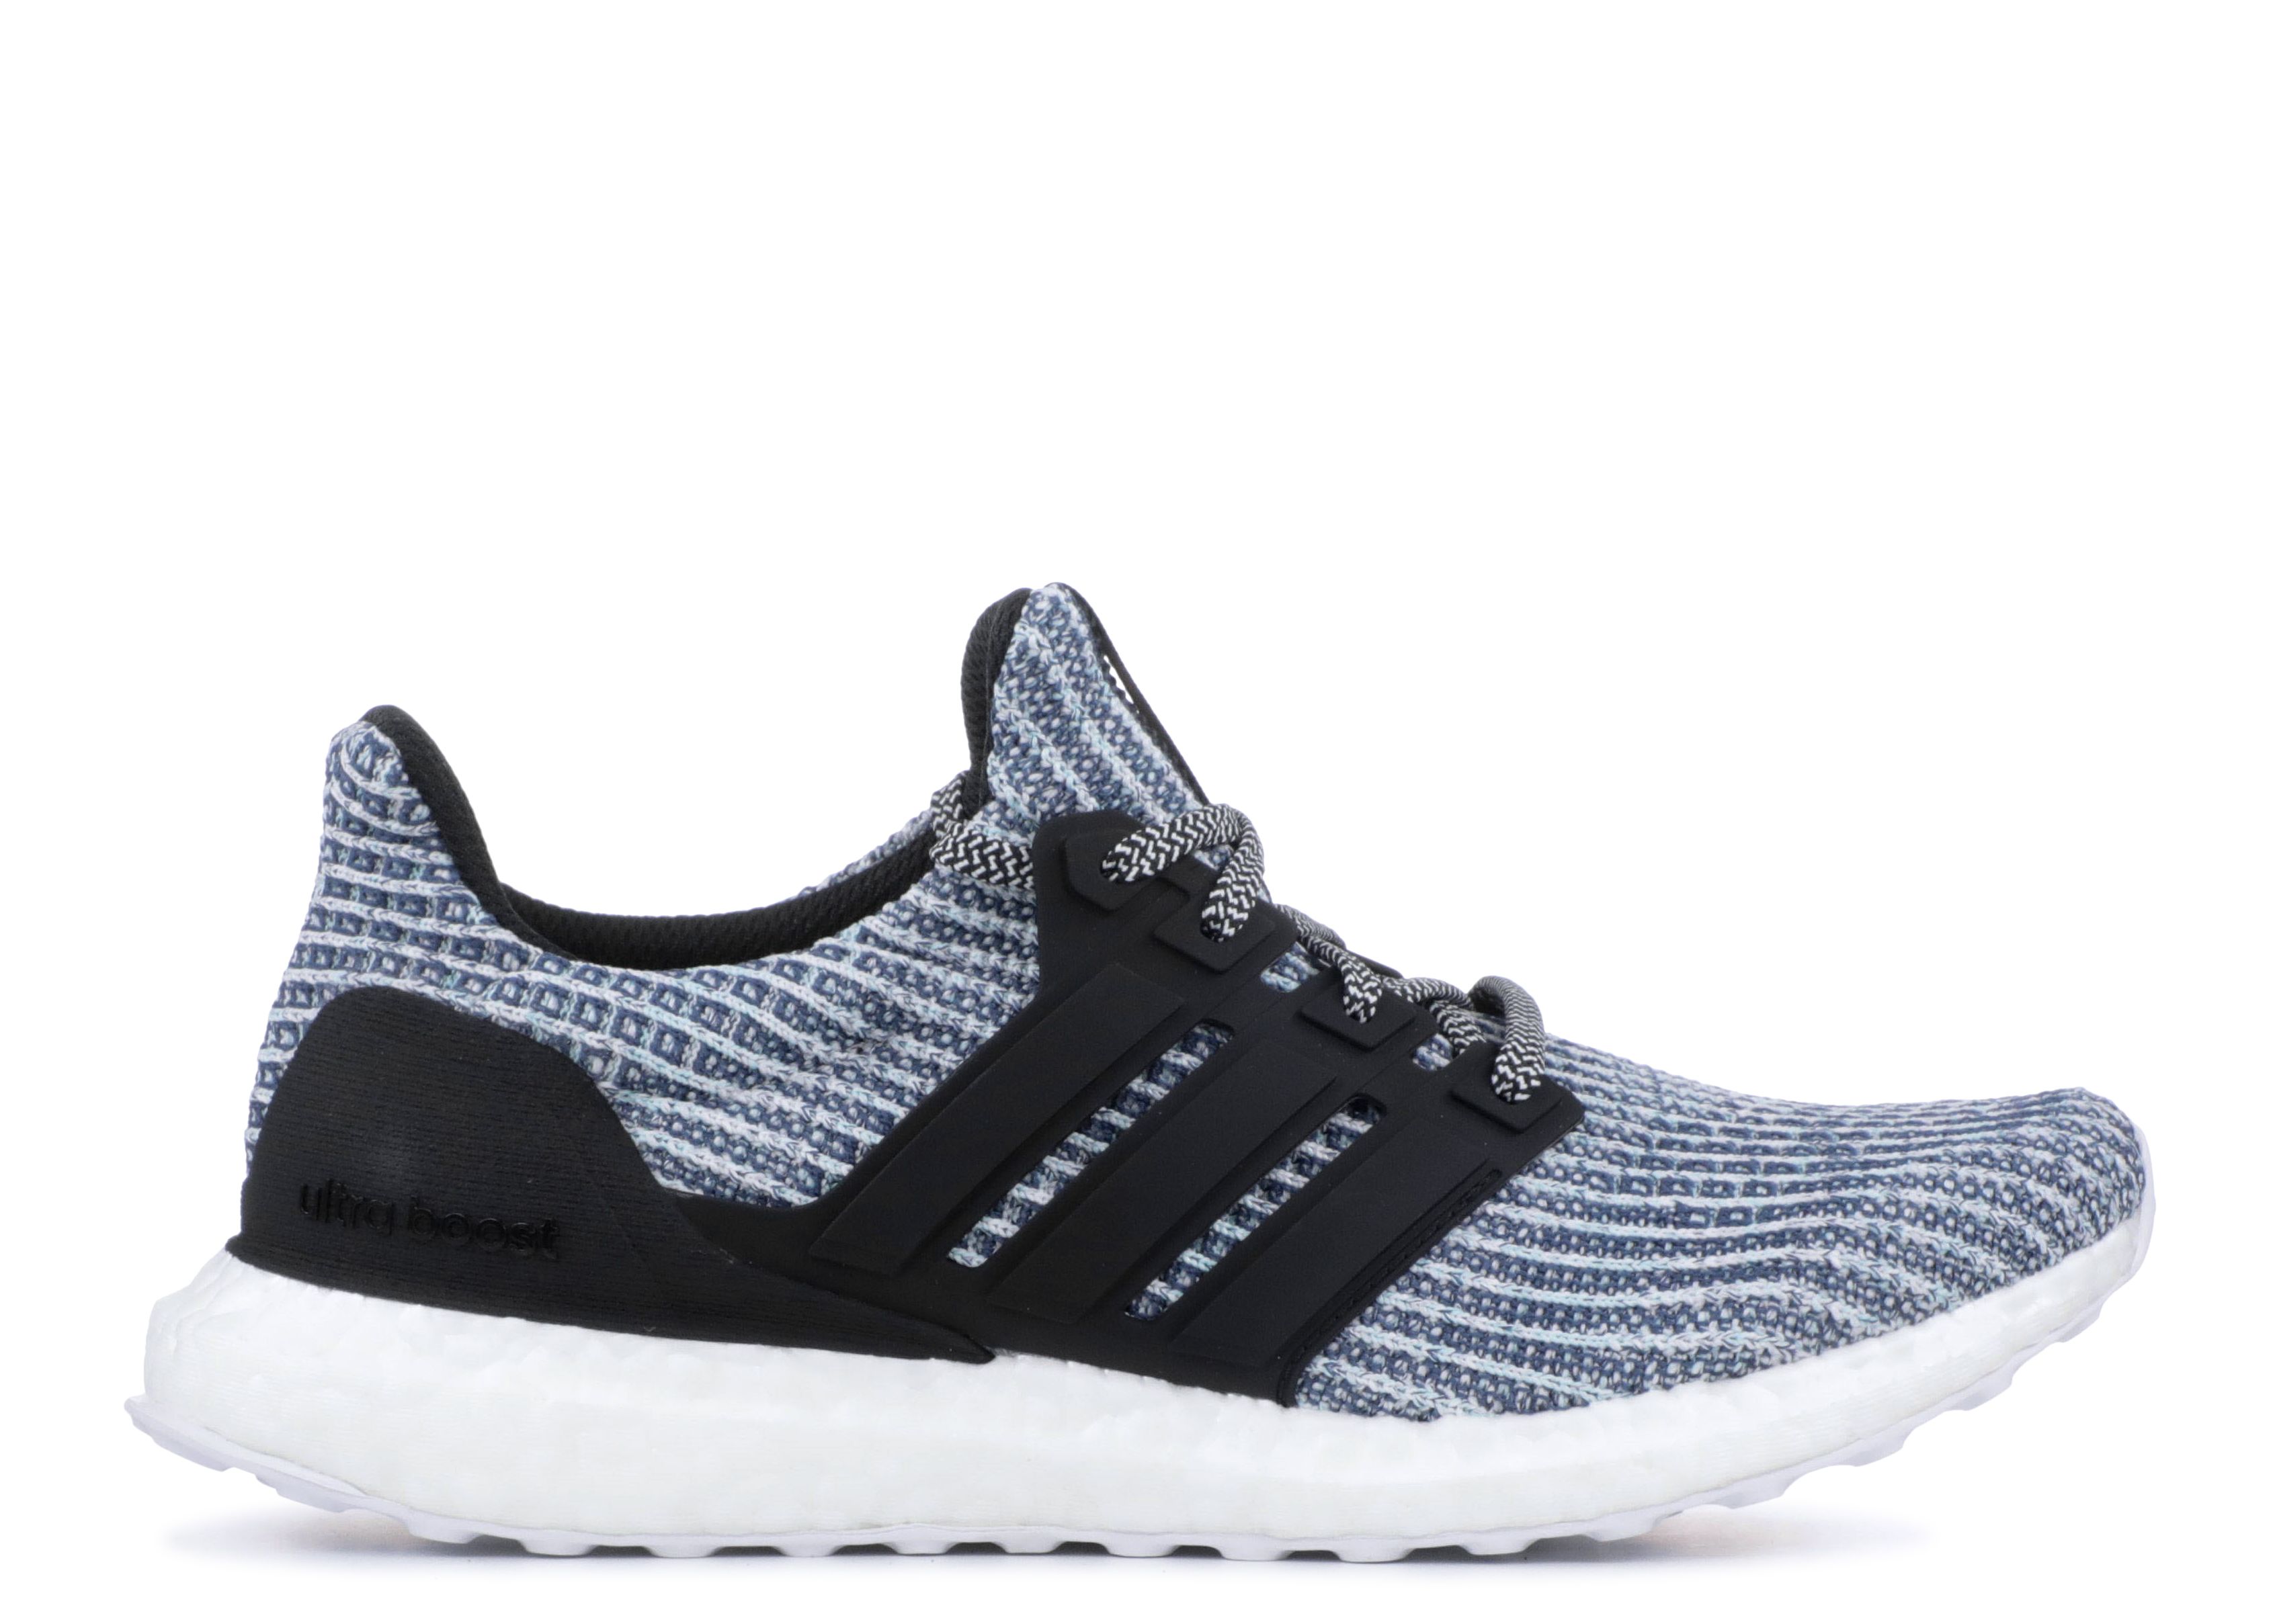 white parley ultra boost